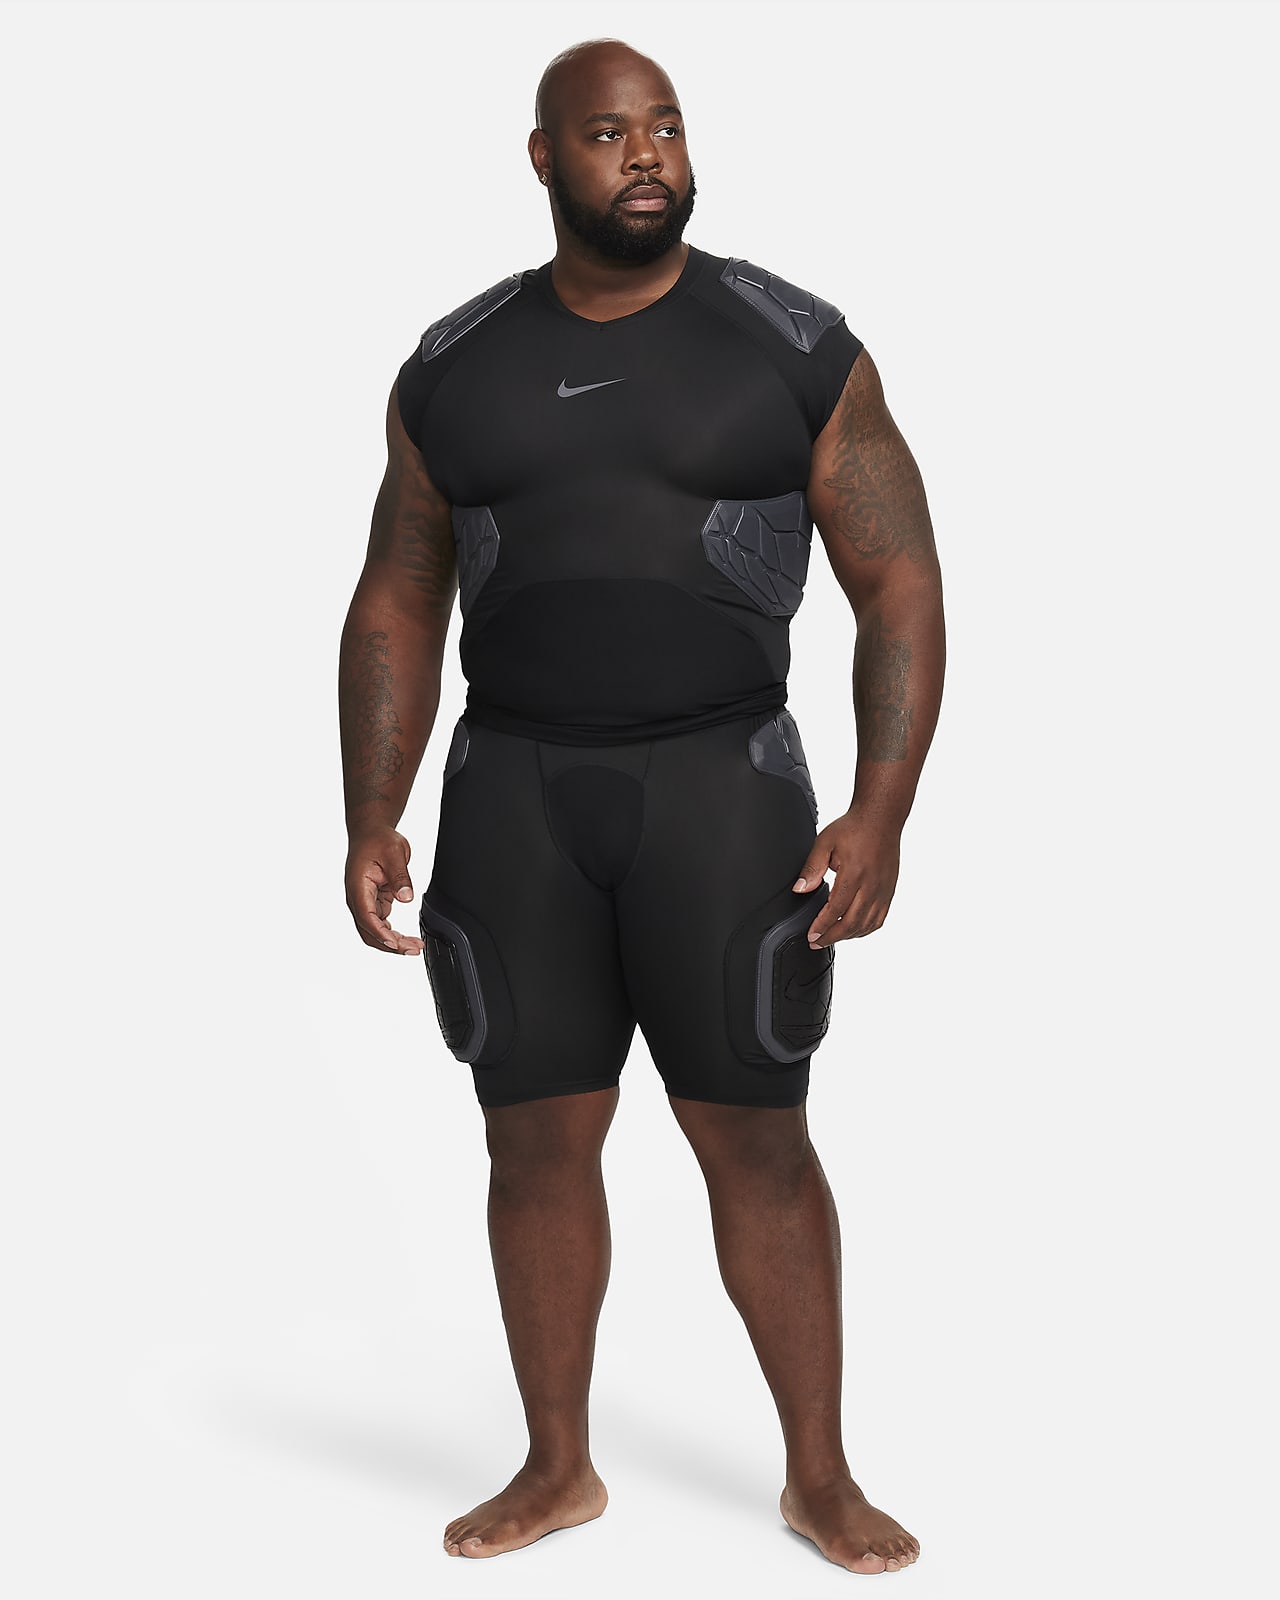 Nike Pro HyperStrong Men's 4-Pad Top.